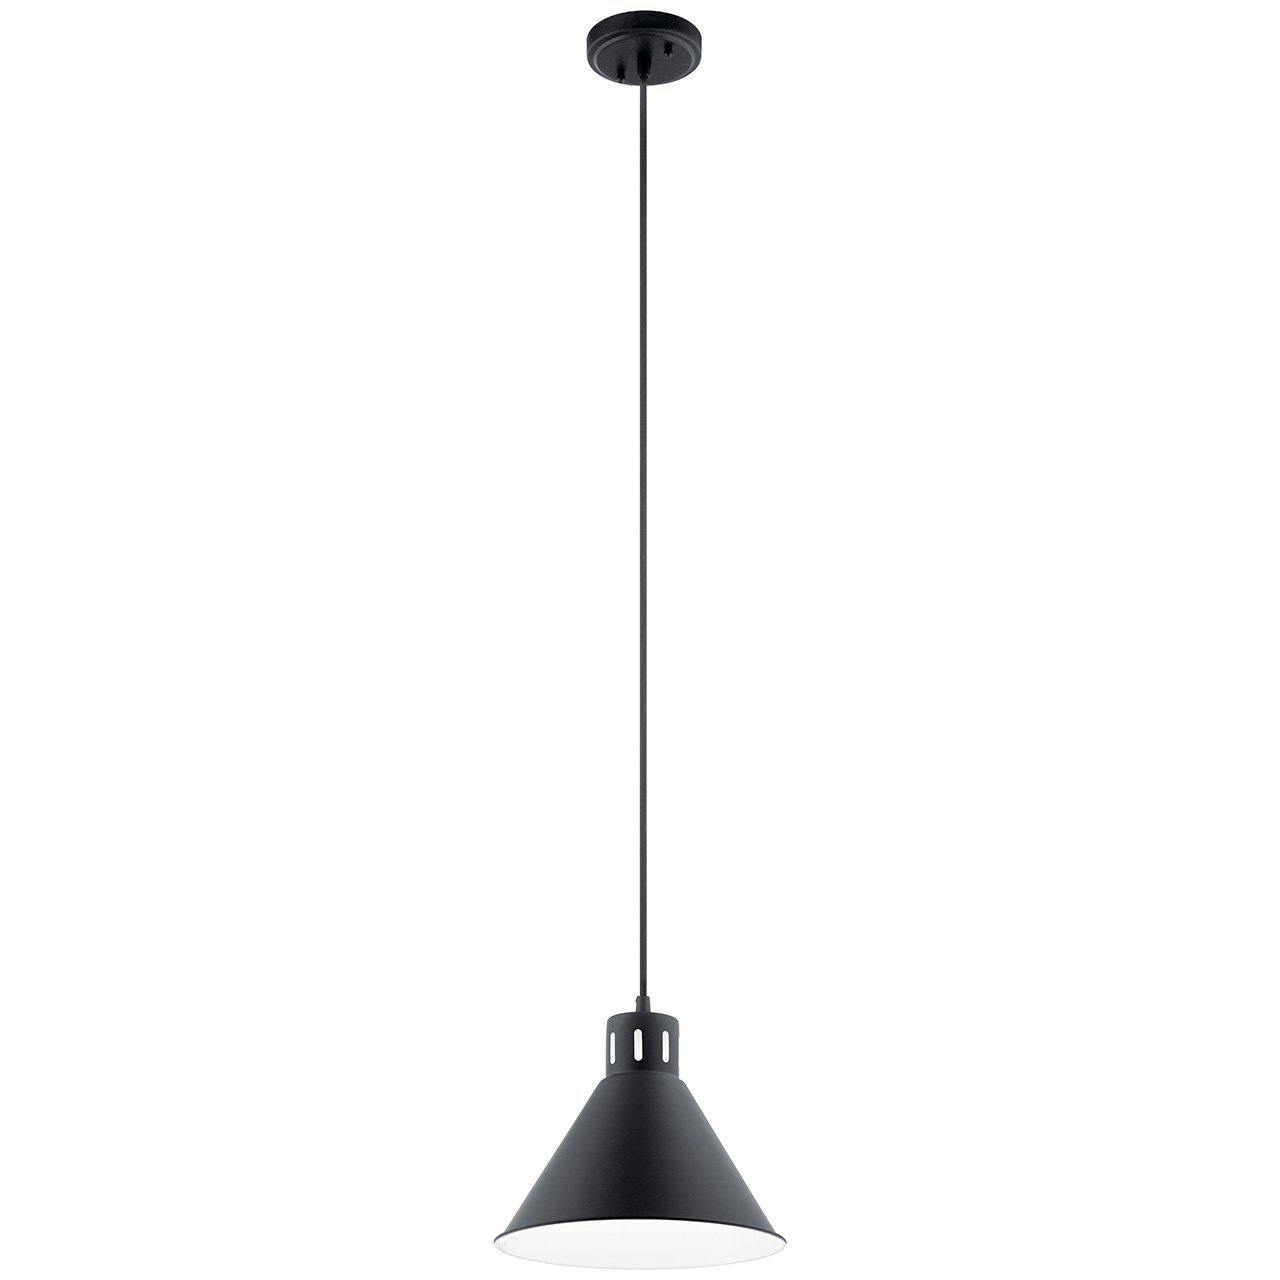 Zailey™ 9.5" 1 Light Pendant in Black on a white background